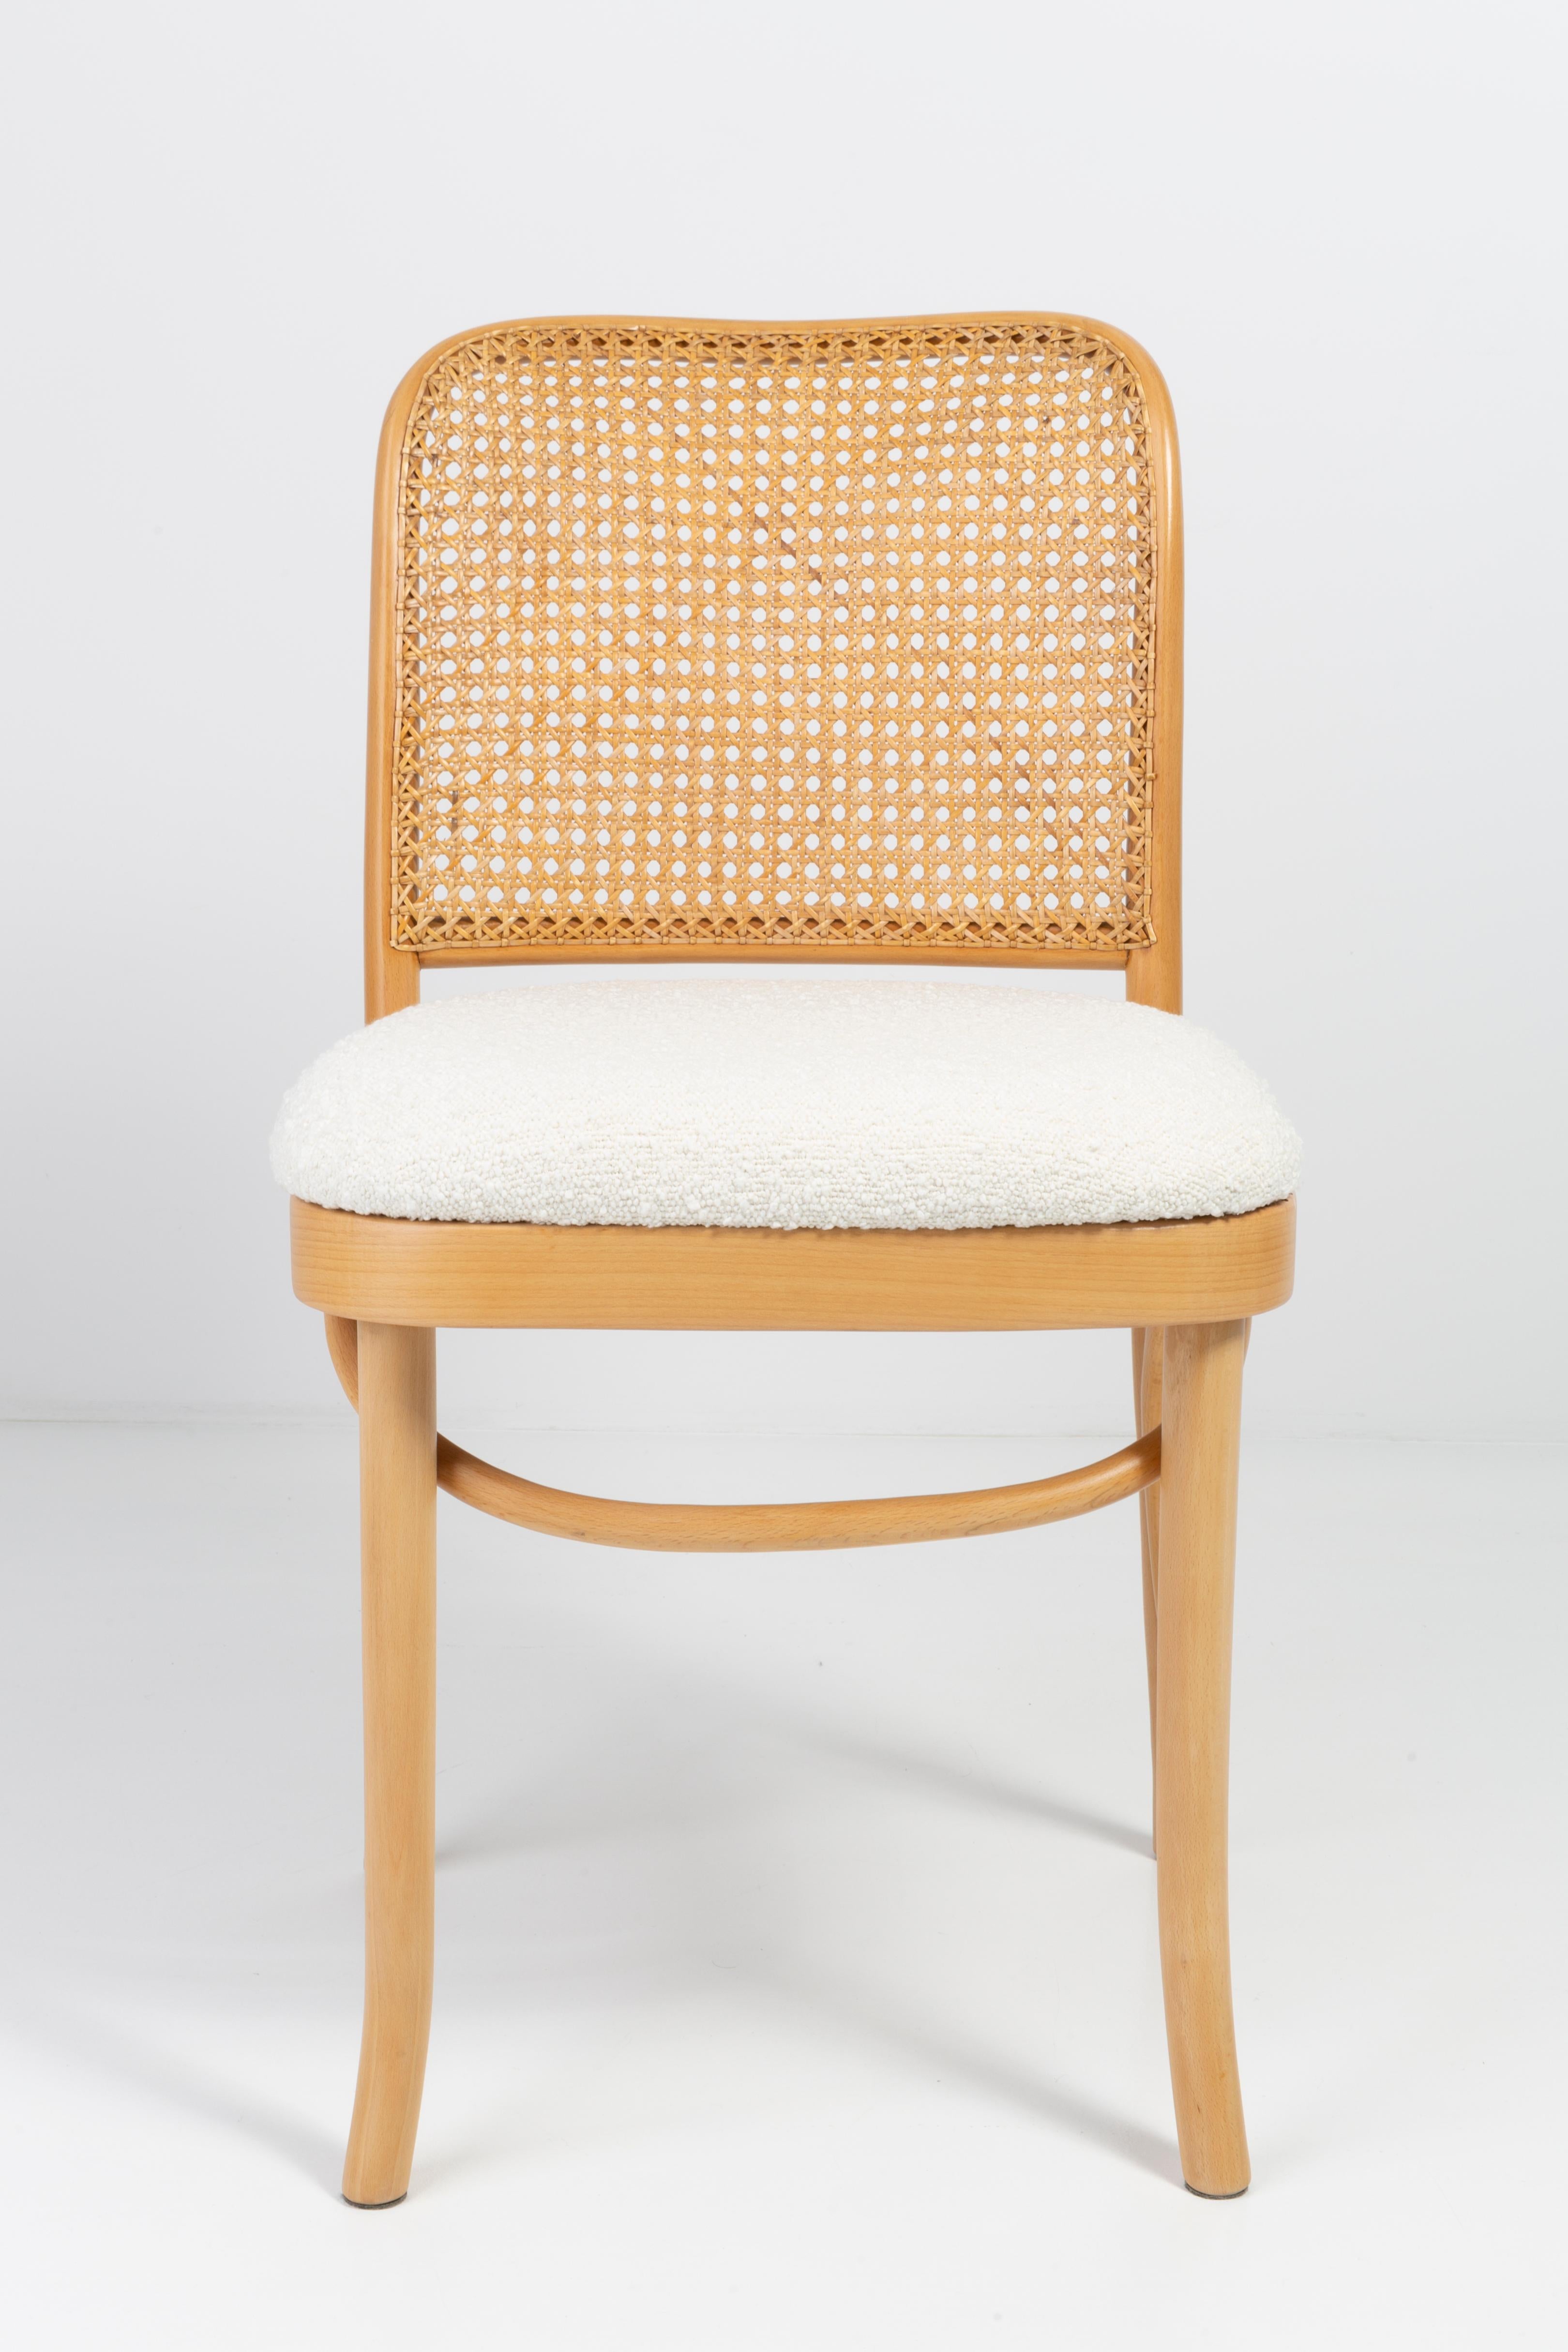 Set of Four White Boucle Thonet Wood Rattan Chairs, 1960s For Sale 10